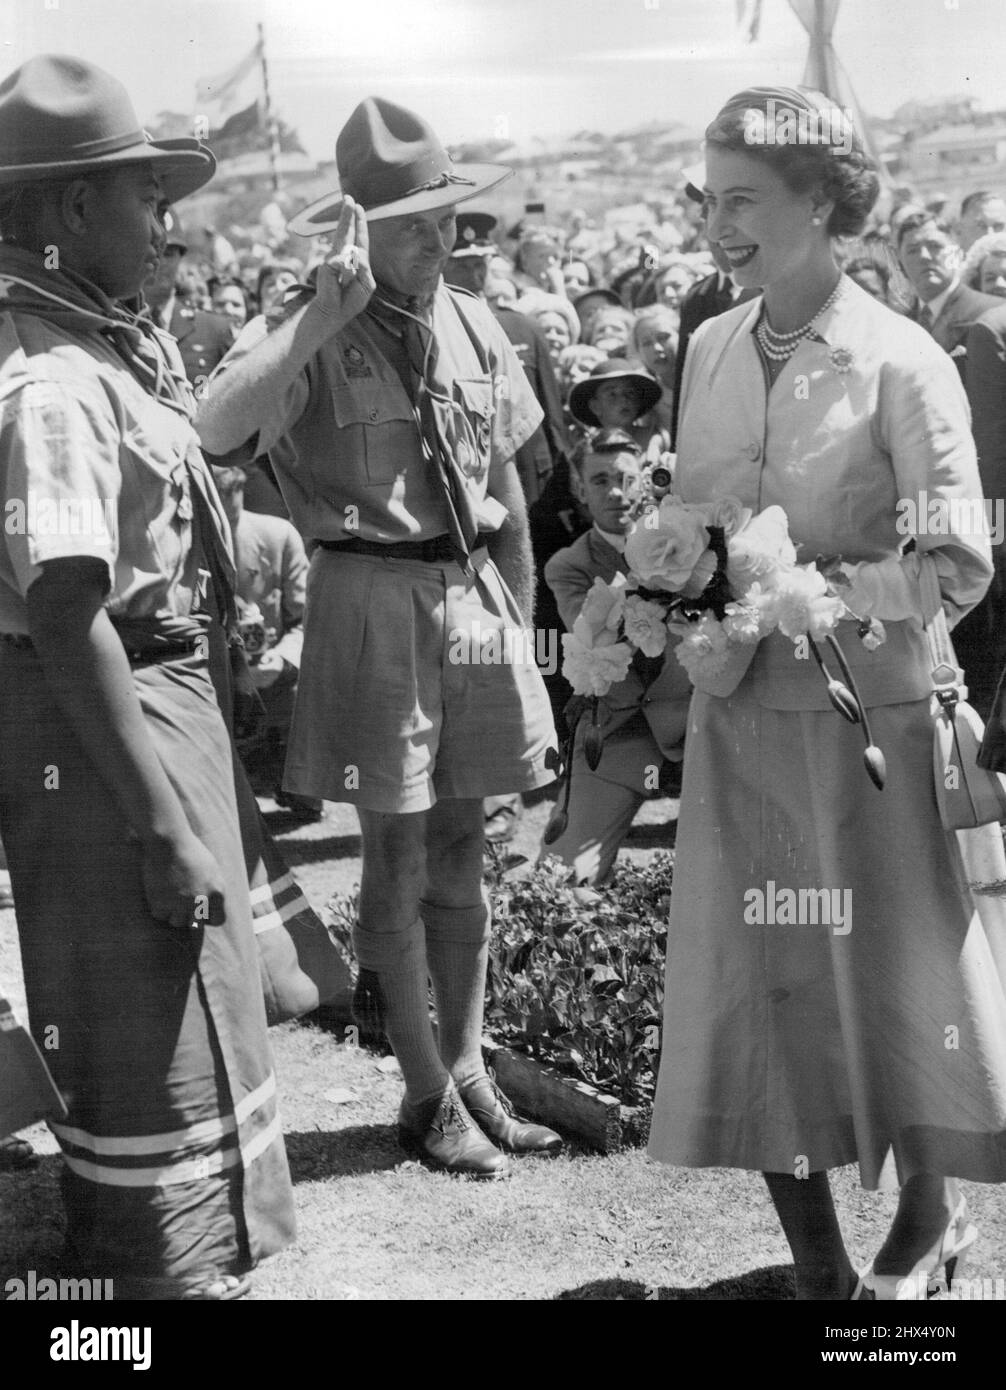 Queen Elizabeth greeting Samoan Scouts who were in the South Island for a jamboree. This picture was taken at Timaru, NZ. Colourful Dress - Scouts from Samoa, who were attending a jamboree near Timaru, will recall for many years the day they met the Queen. The scoutmaster salutes as Her Majesty talked to one of the scouts, whose colorful dress impresses the Queen. February 03, 1954. Stock Photo